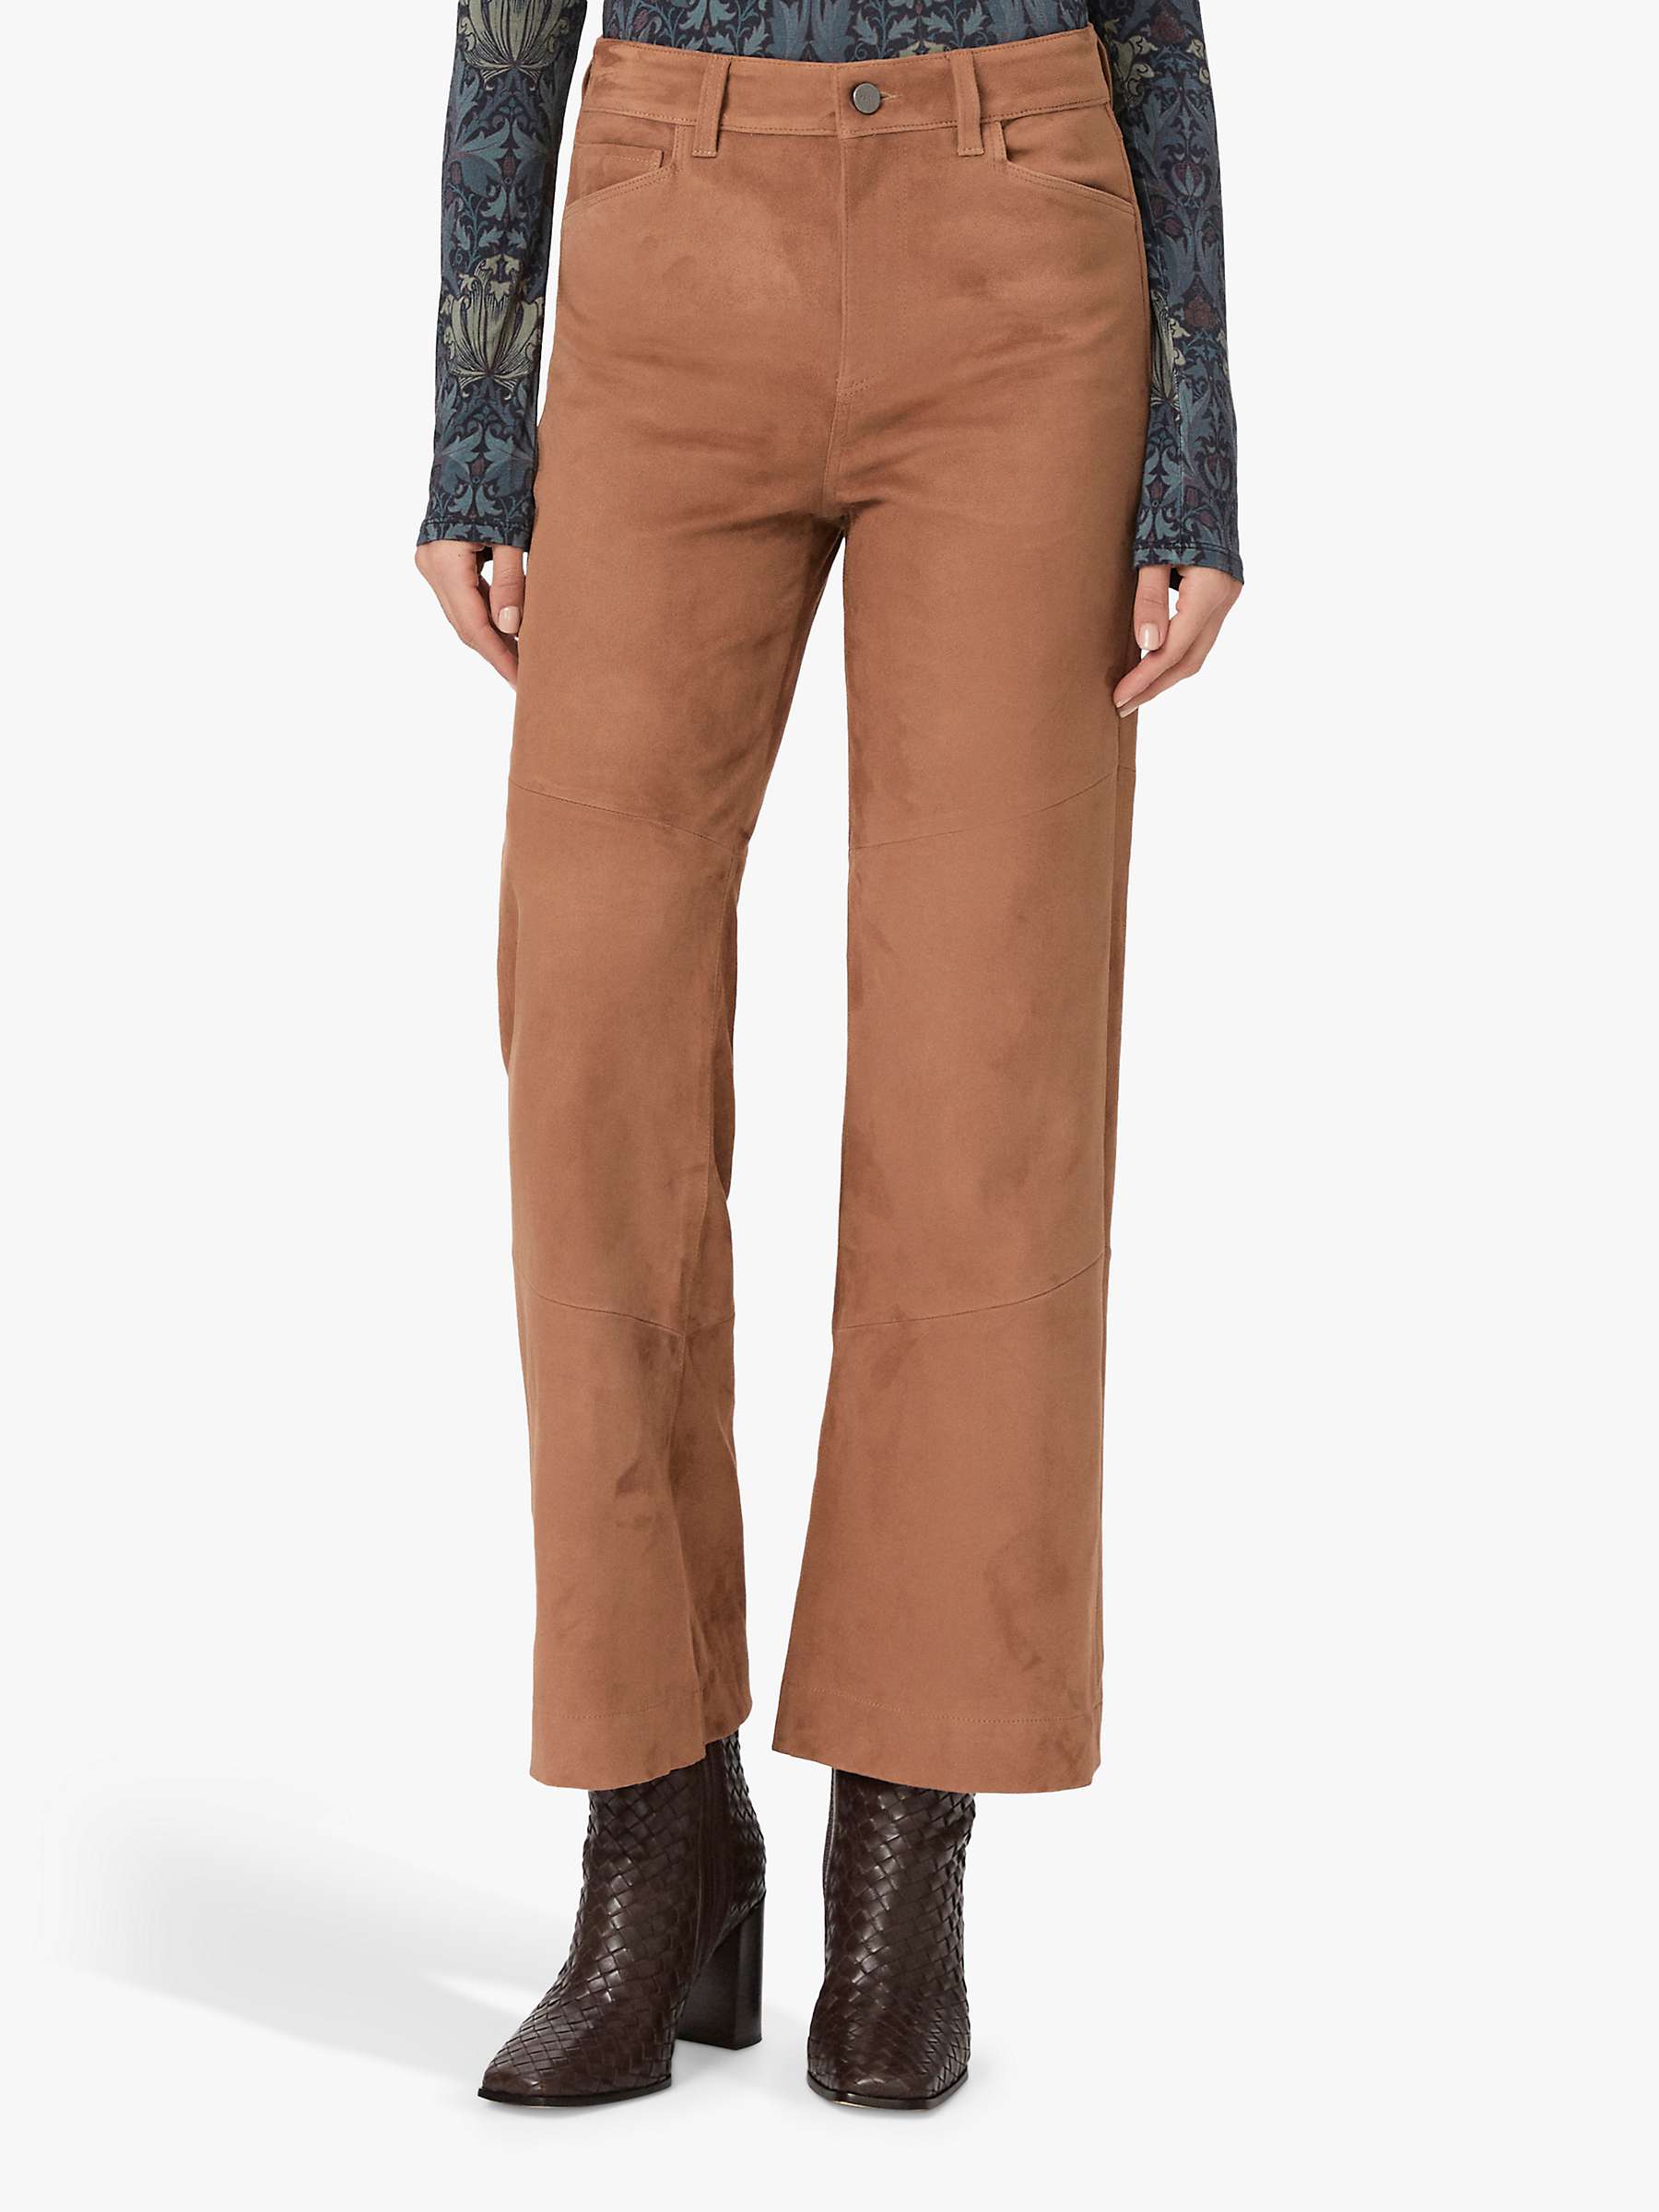 Buy PAIGE Suede Pocket Ankle Trousers, Toffee Bronze Online at johnlewis.com